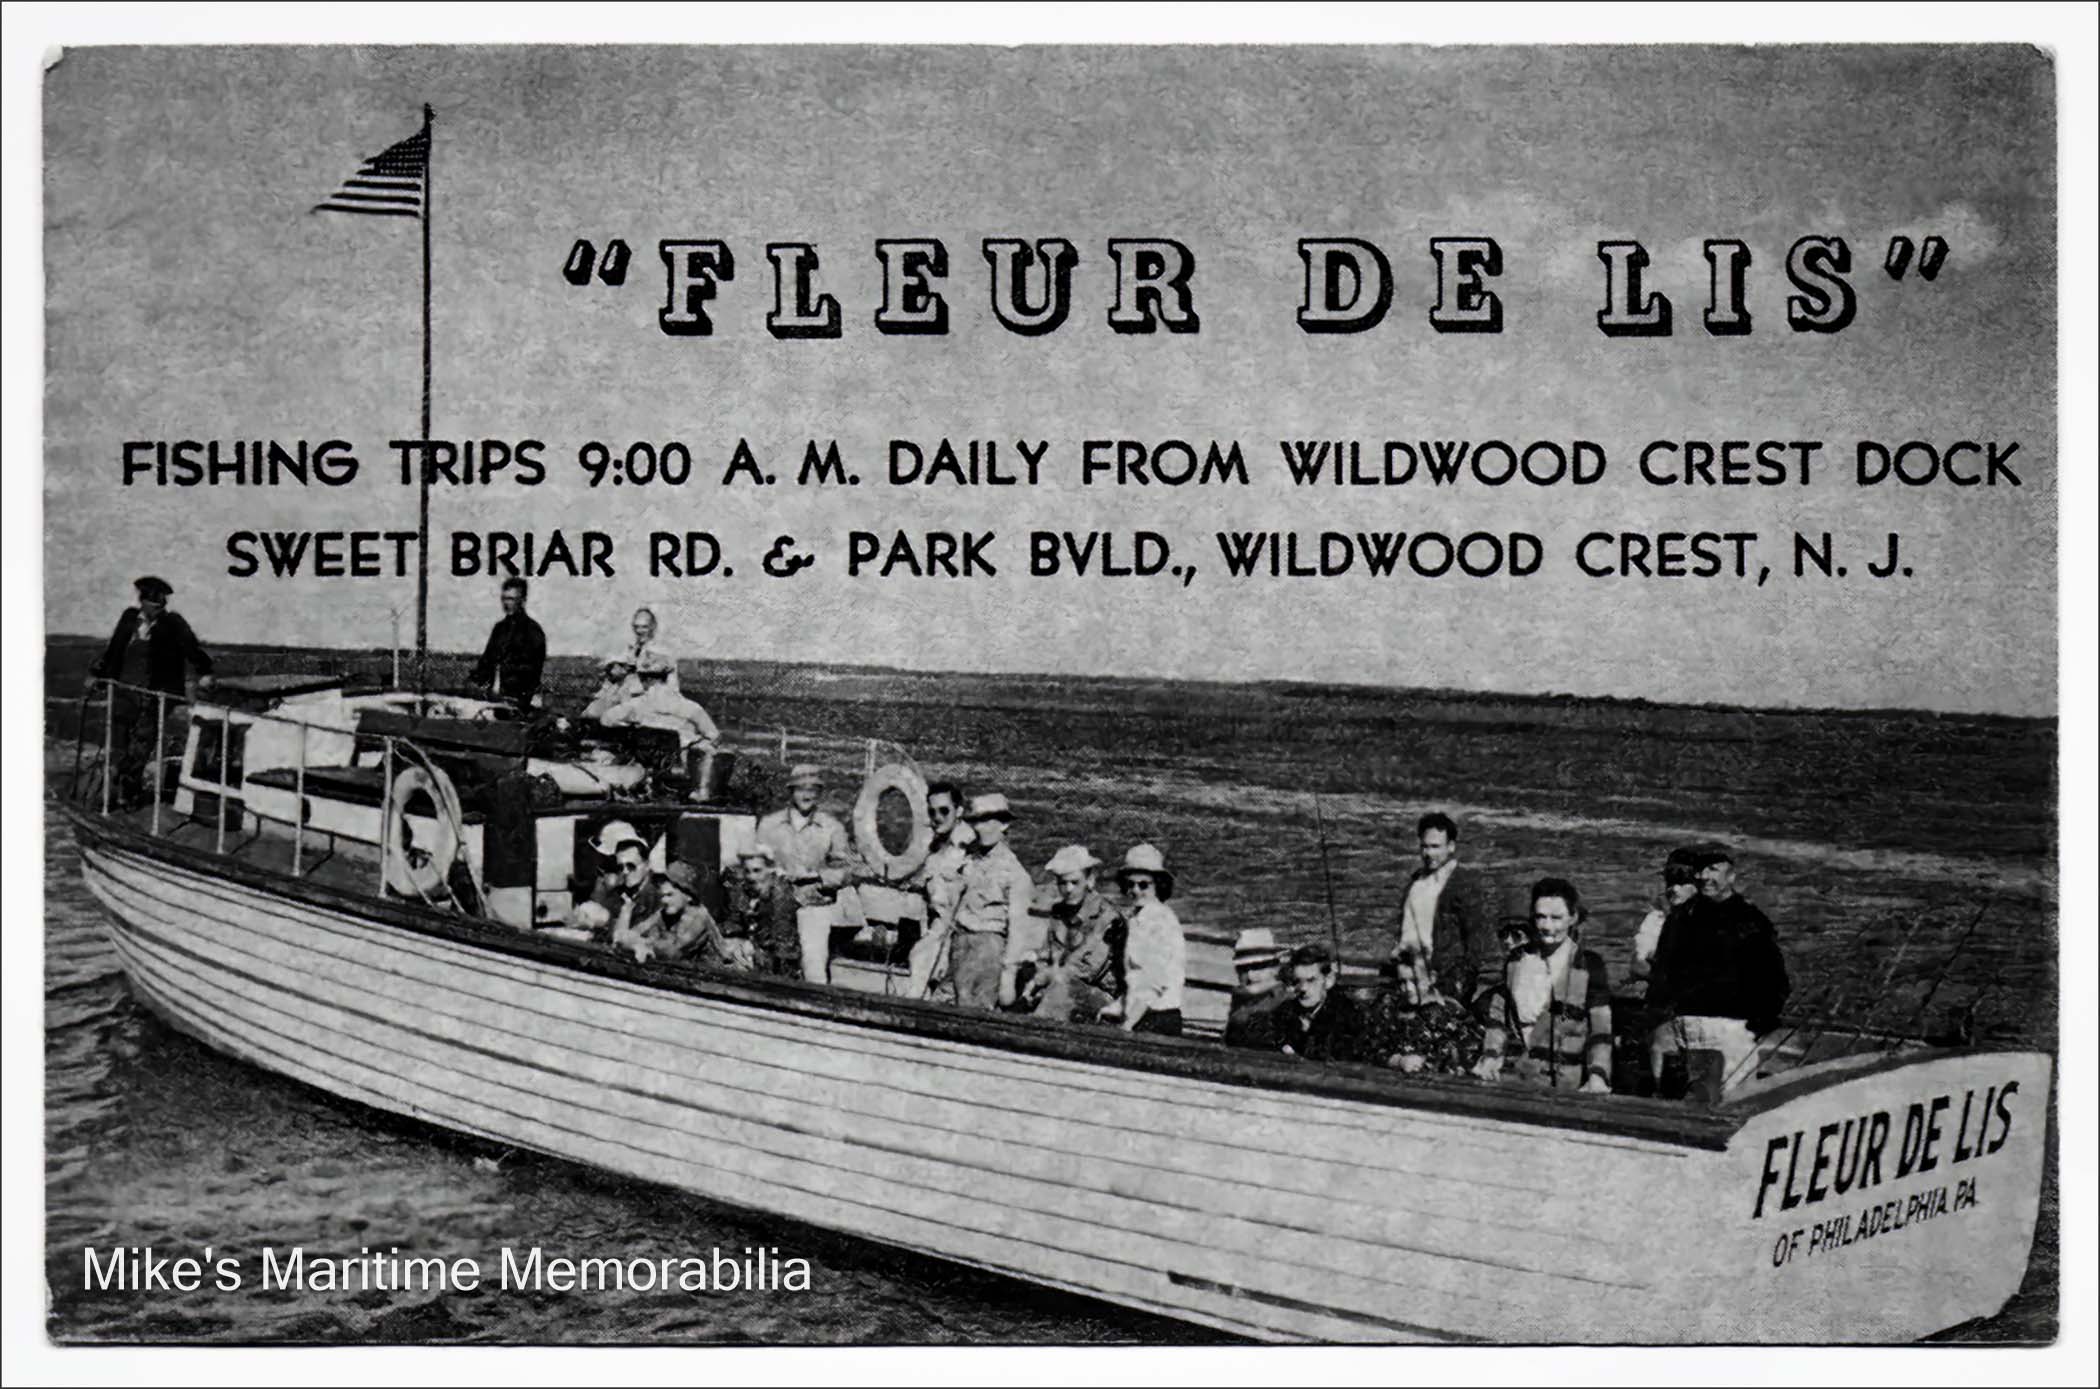 FLEUR DE LIS Advertising Sign, Wildwood Crest, NJ – 1946 This vintage 1946 advertising sign is for Captain Harry Sinn's party fishing boat "FLEUR DE LIS" from Wildwood Crest, NJ. Her lapstrake planking and low profile hull are remnants of her "rumrunner" days prior to party boat fishing.